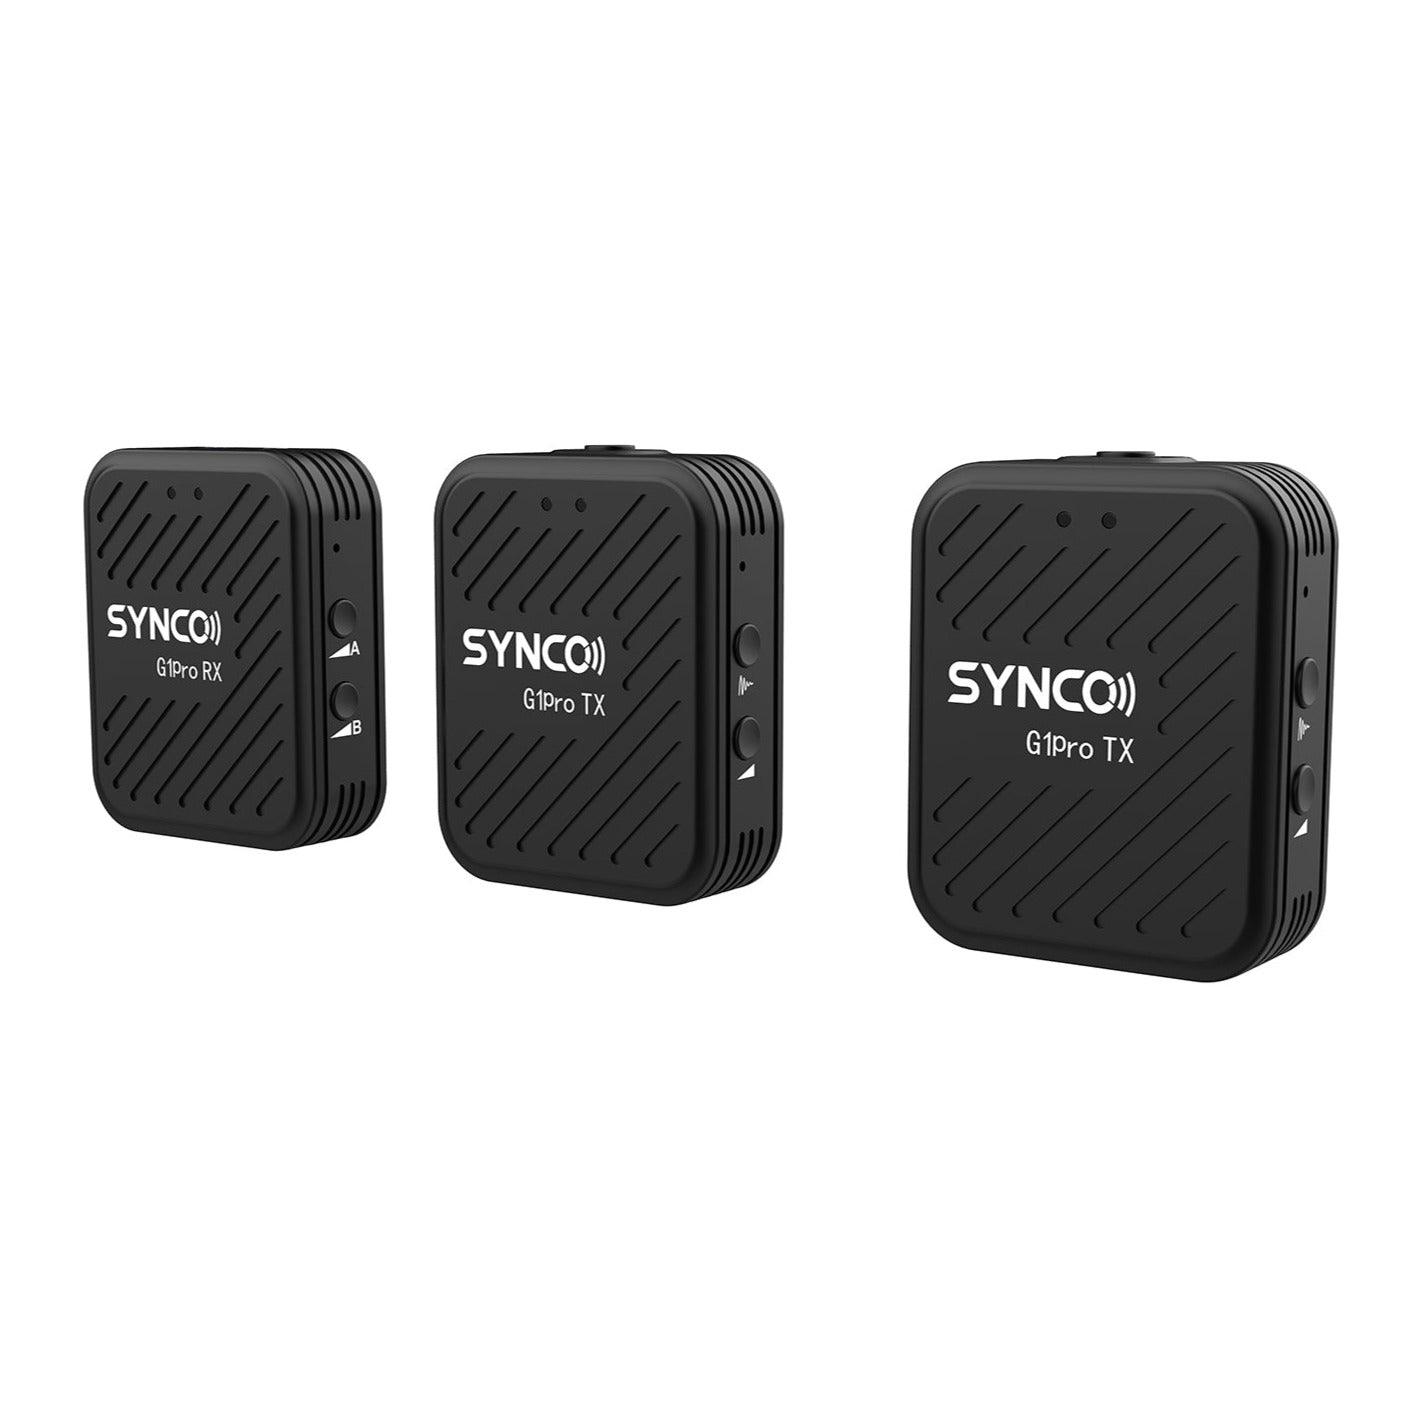 SYNCO G1A2-Pro Ultracompact Digital Wireless Microphone - Vitopal